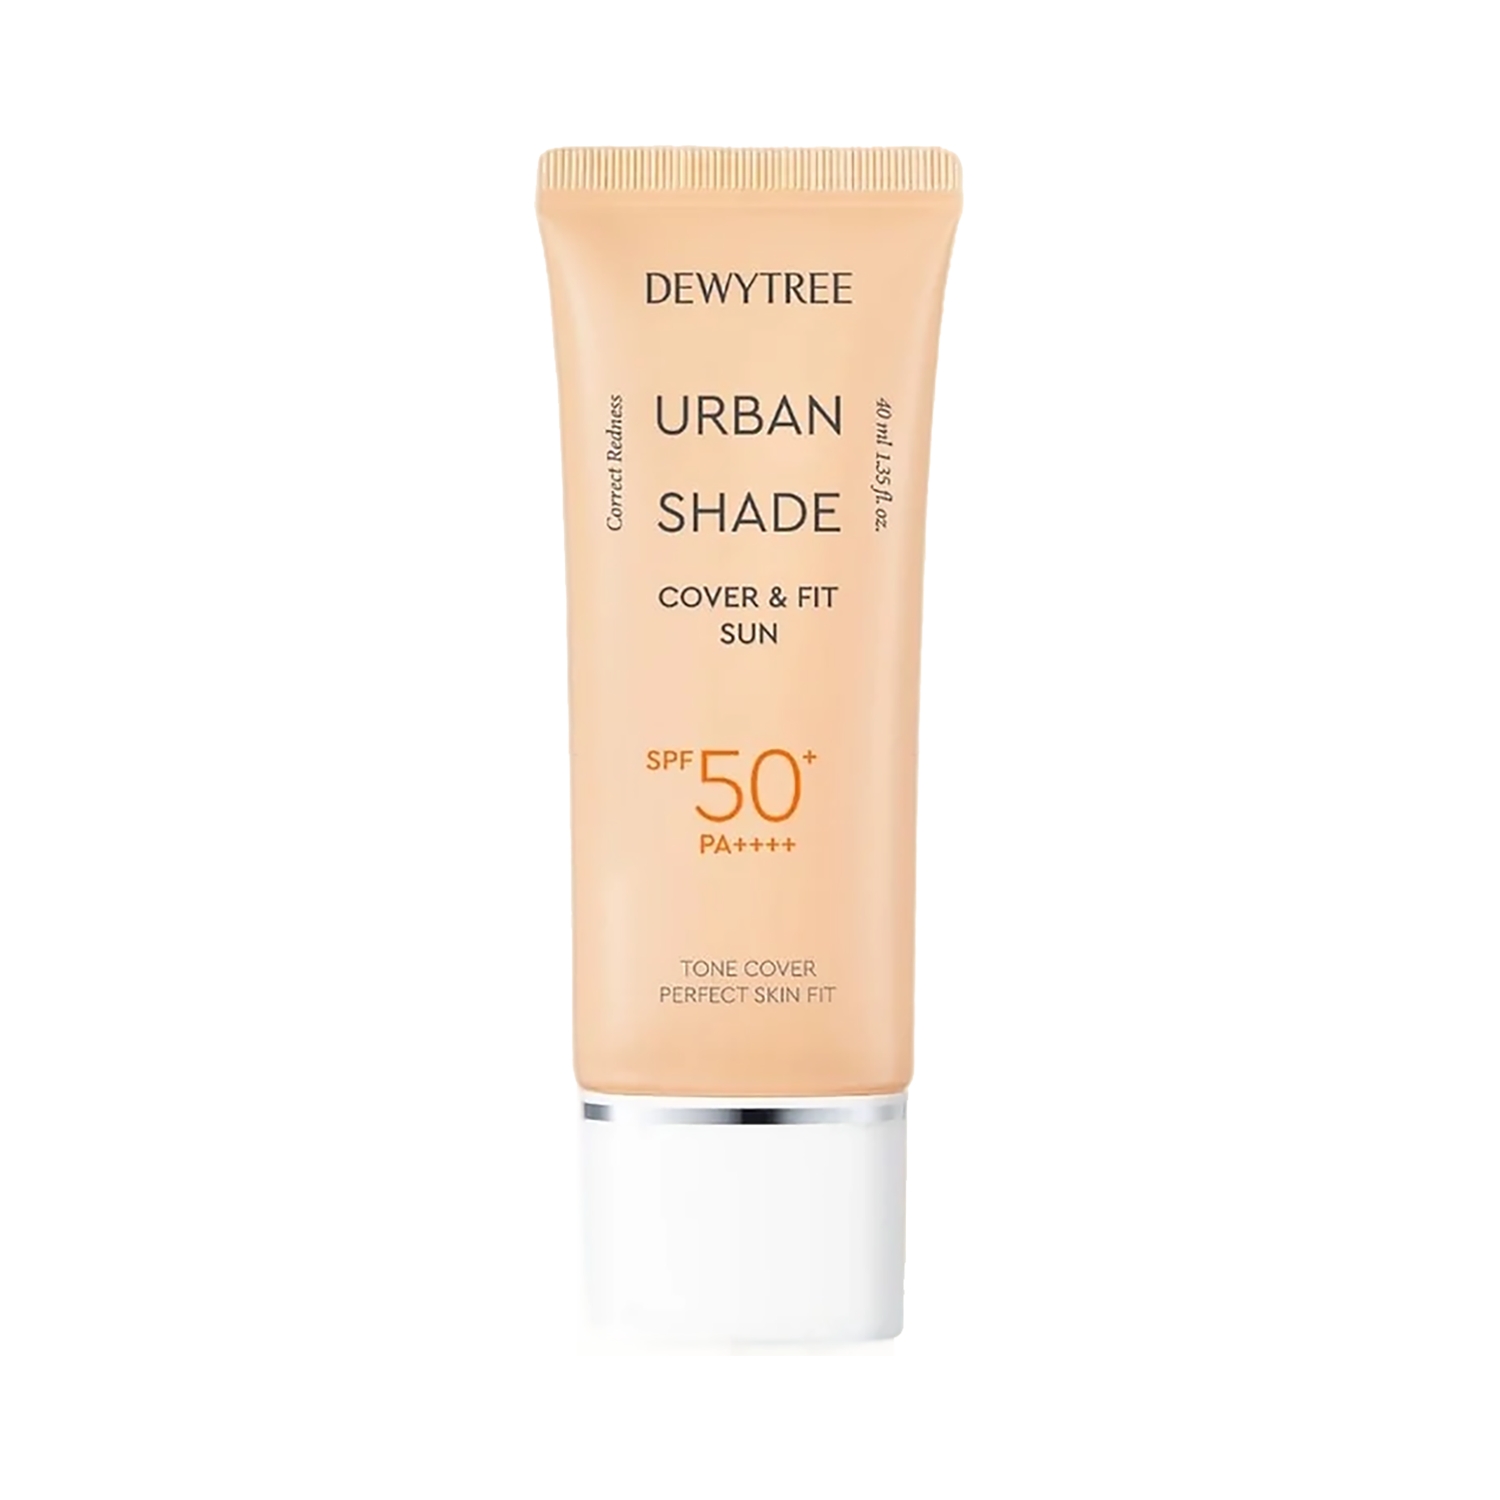 Dewytree | Dewytree Urban Shade Cover and Fit Sunscreen SPF 50+ PA++++ (40ml)